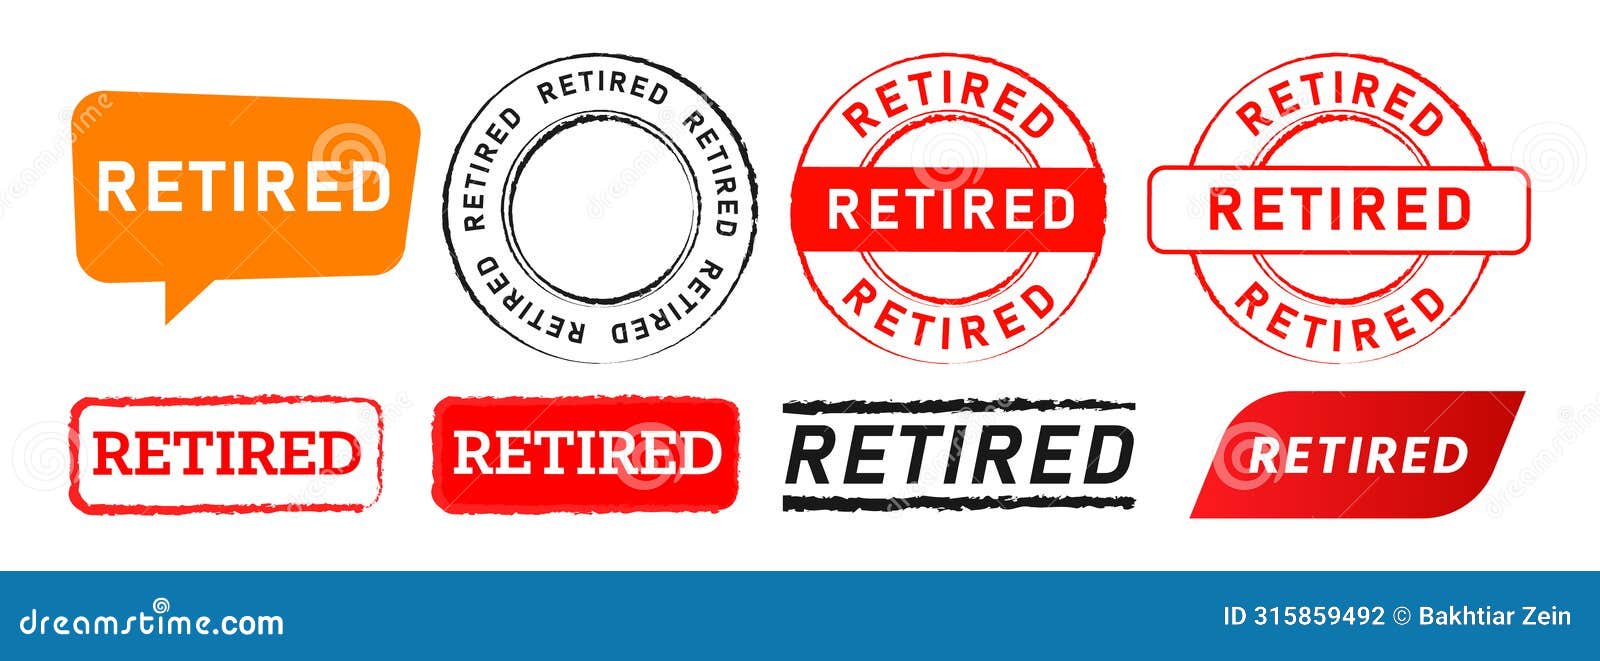 retired stamp and speech bubble label sticker sign for retirement pensioner